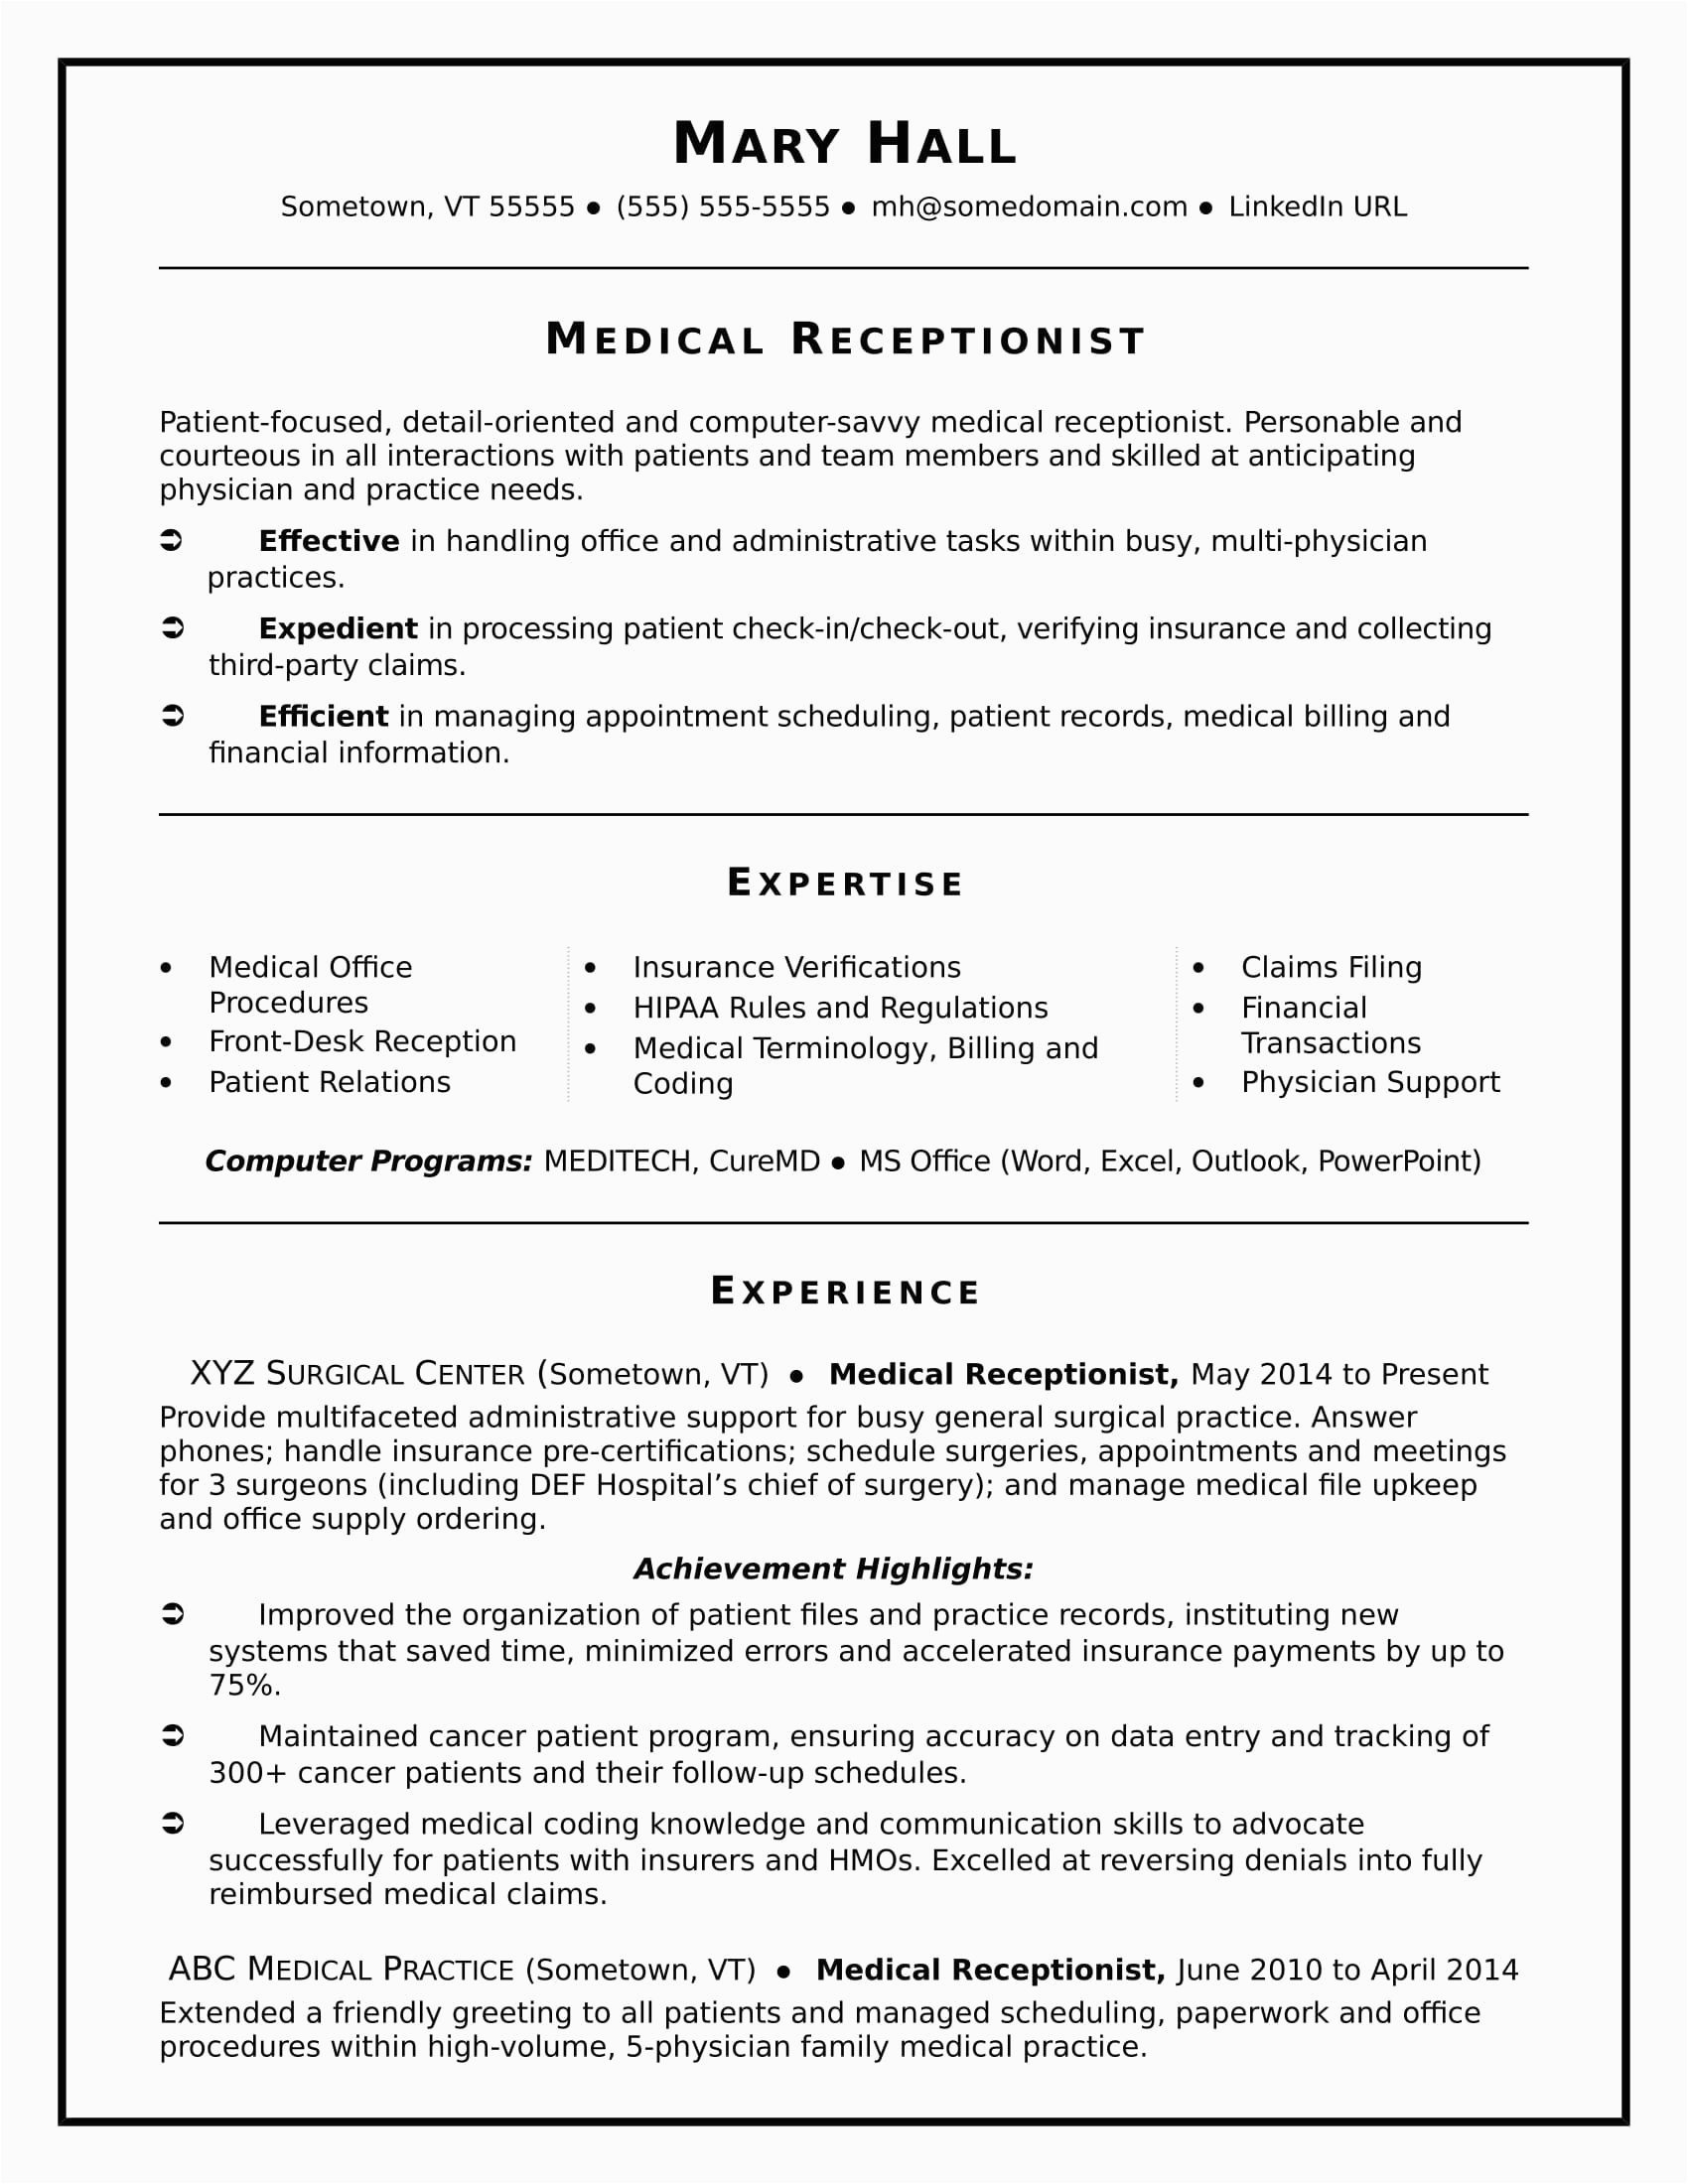 Sample Resume for Medical Receptionist with Experience Medical Secretary Resume Samples Resume